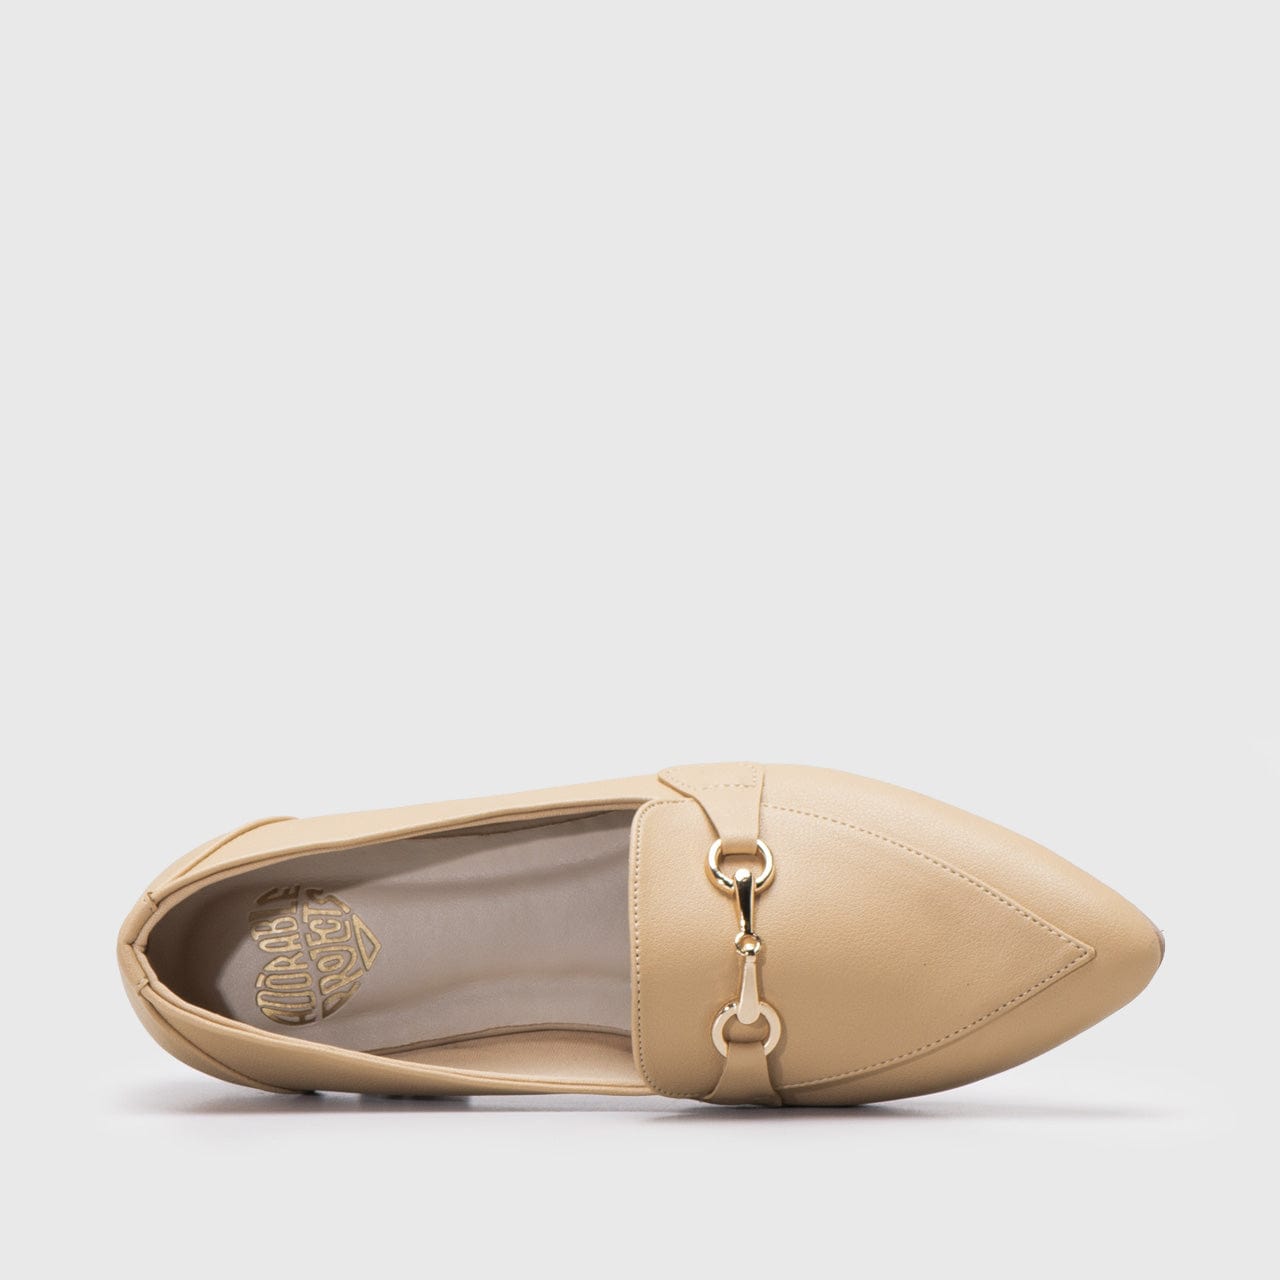 Adorable Projects-Dev Flat shoes Mandy Point Flat Shoes Nude